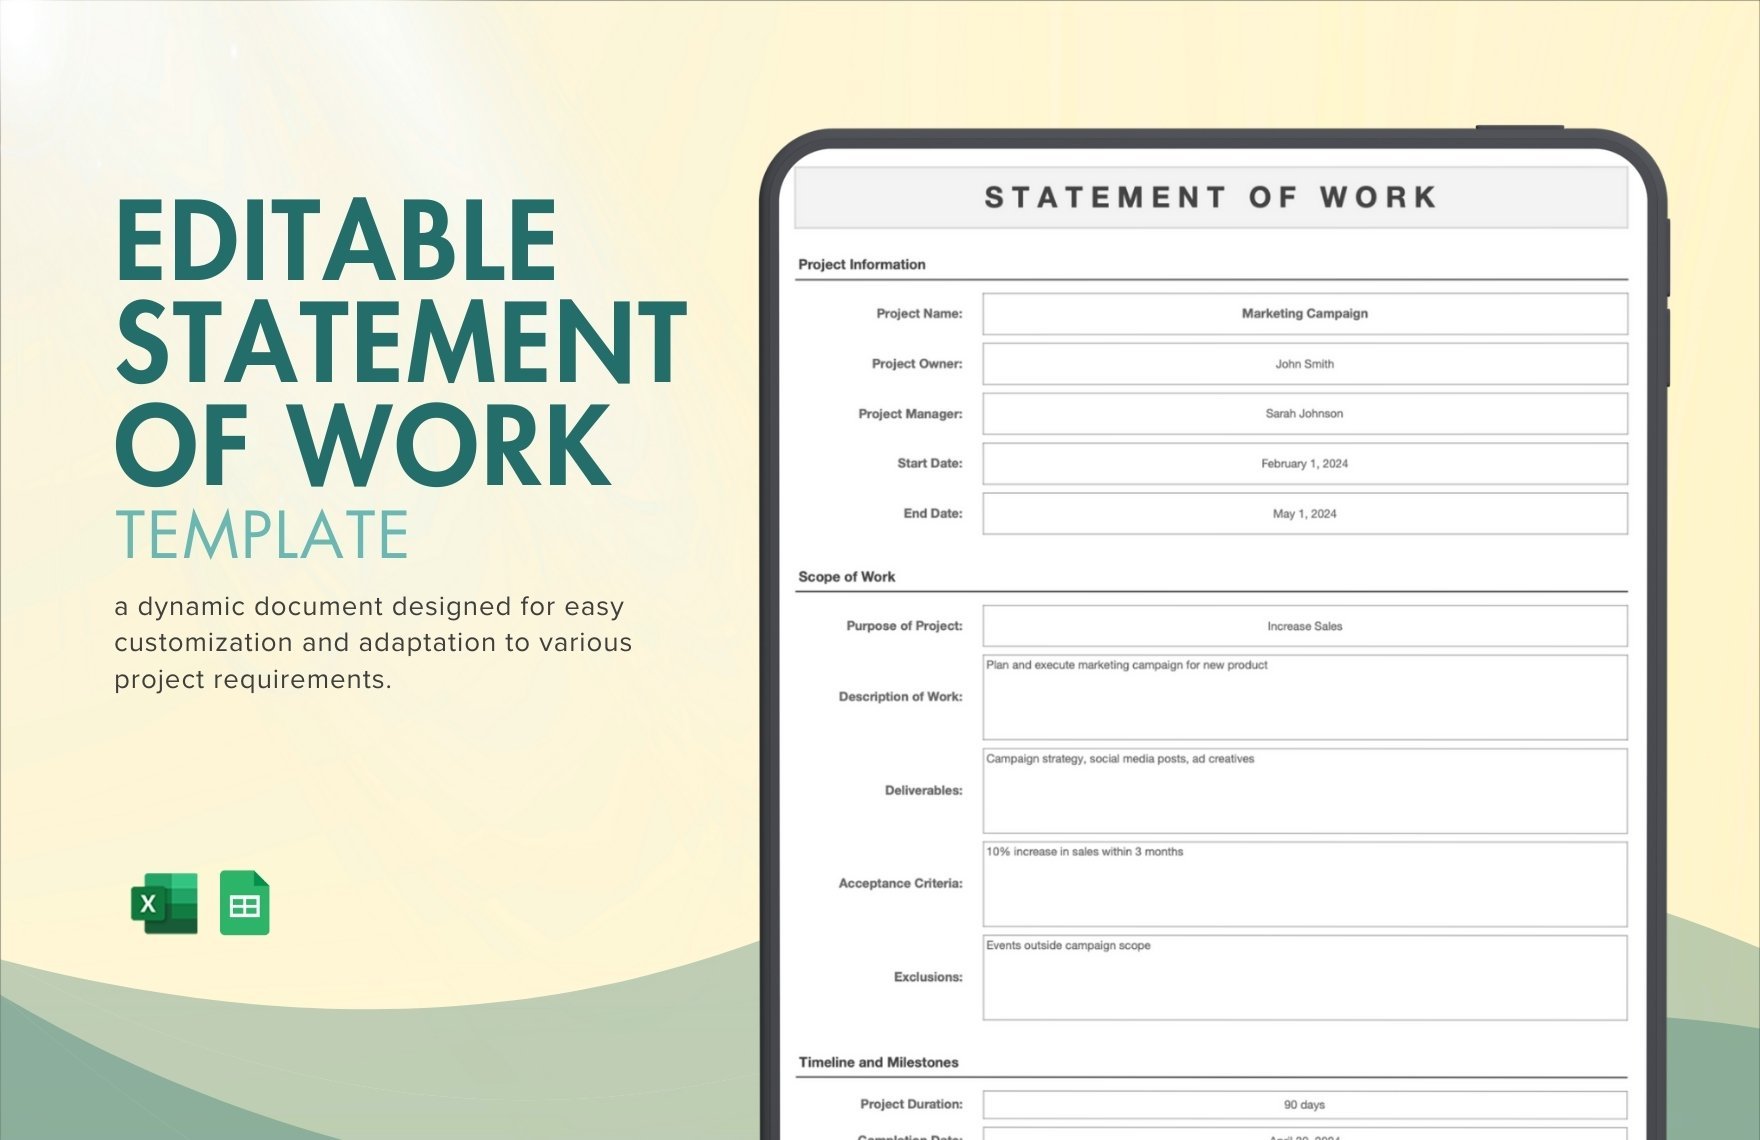 Editable Statement of Work Template in Excel, Google Sheets